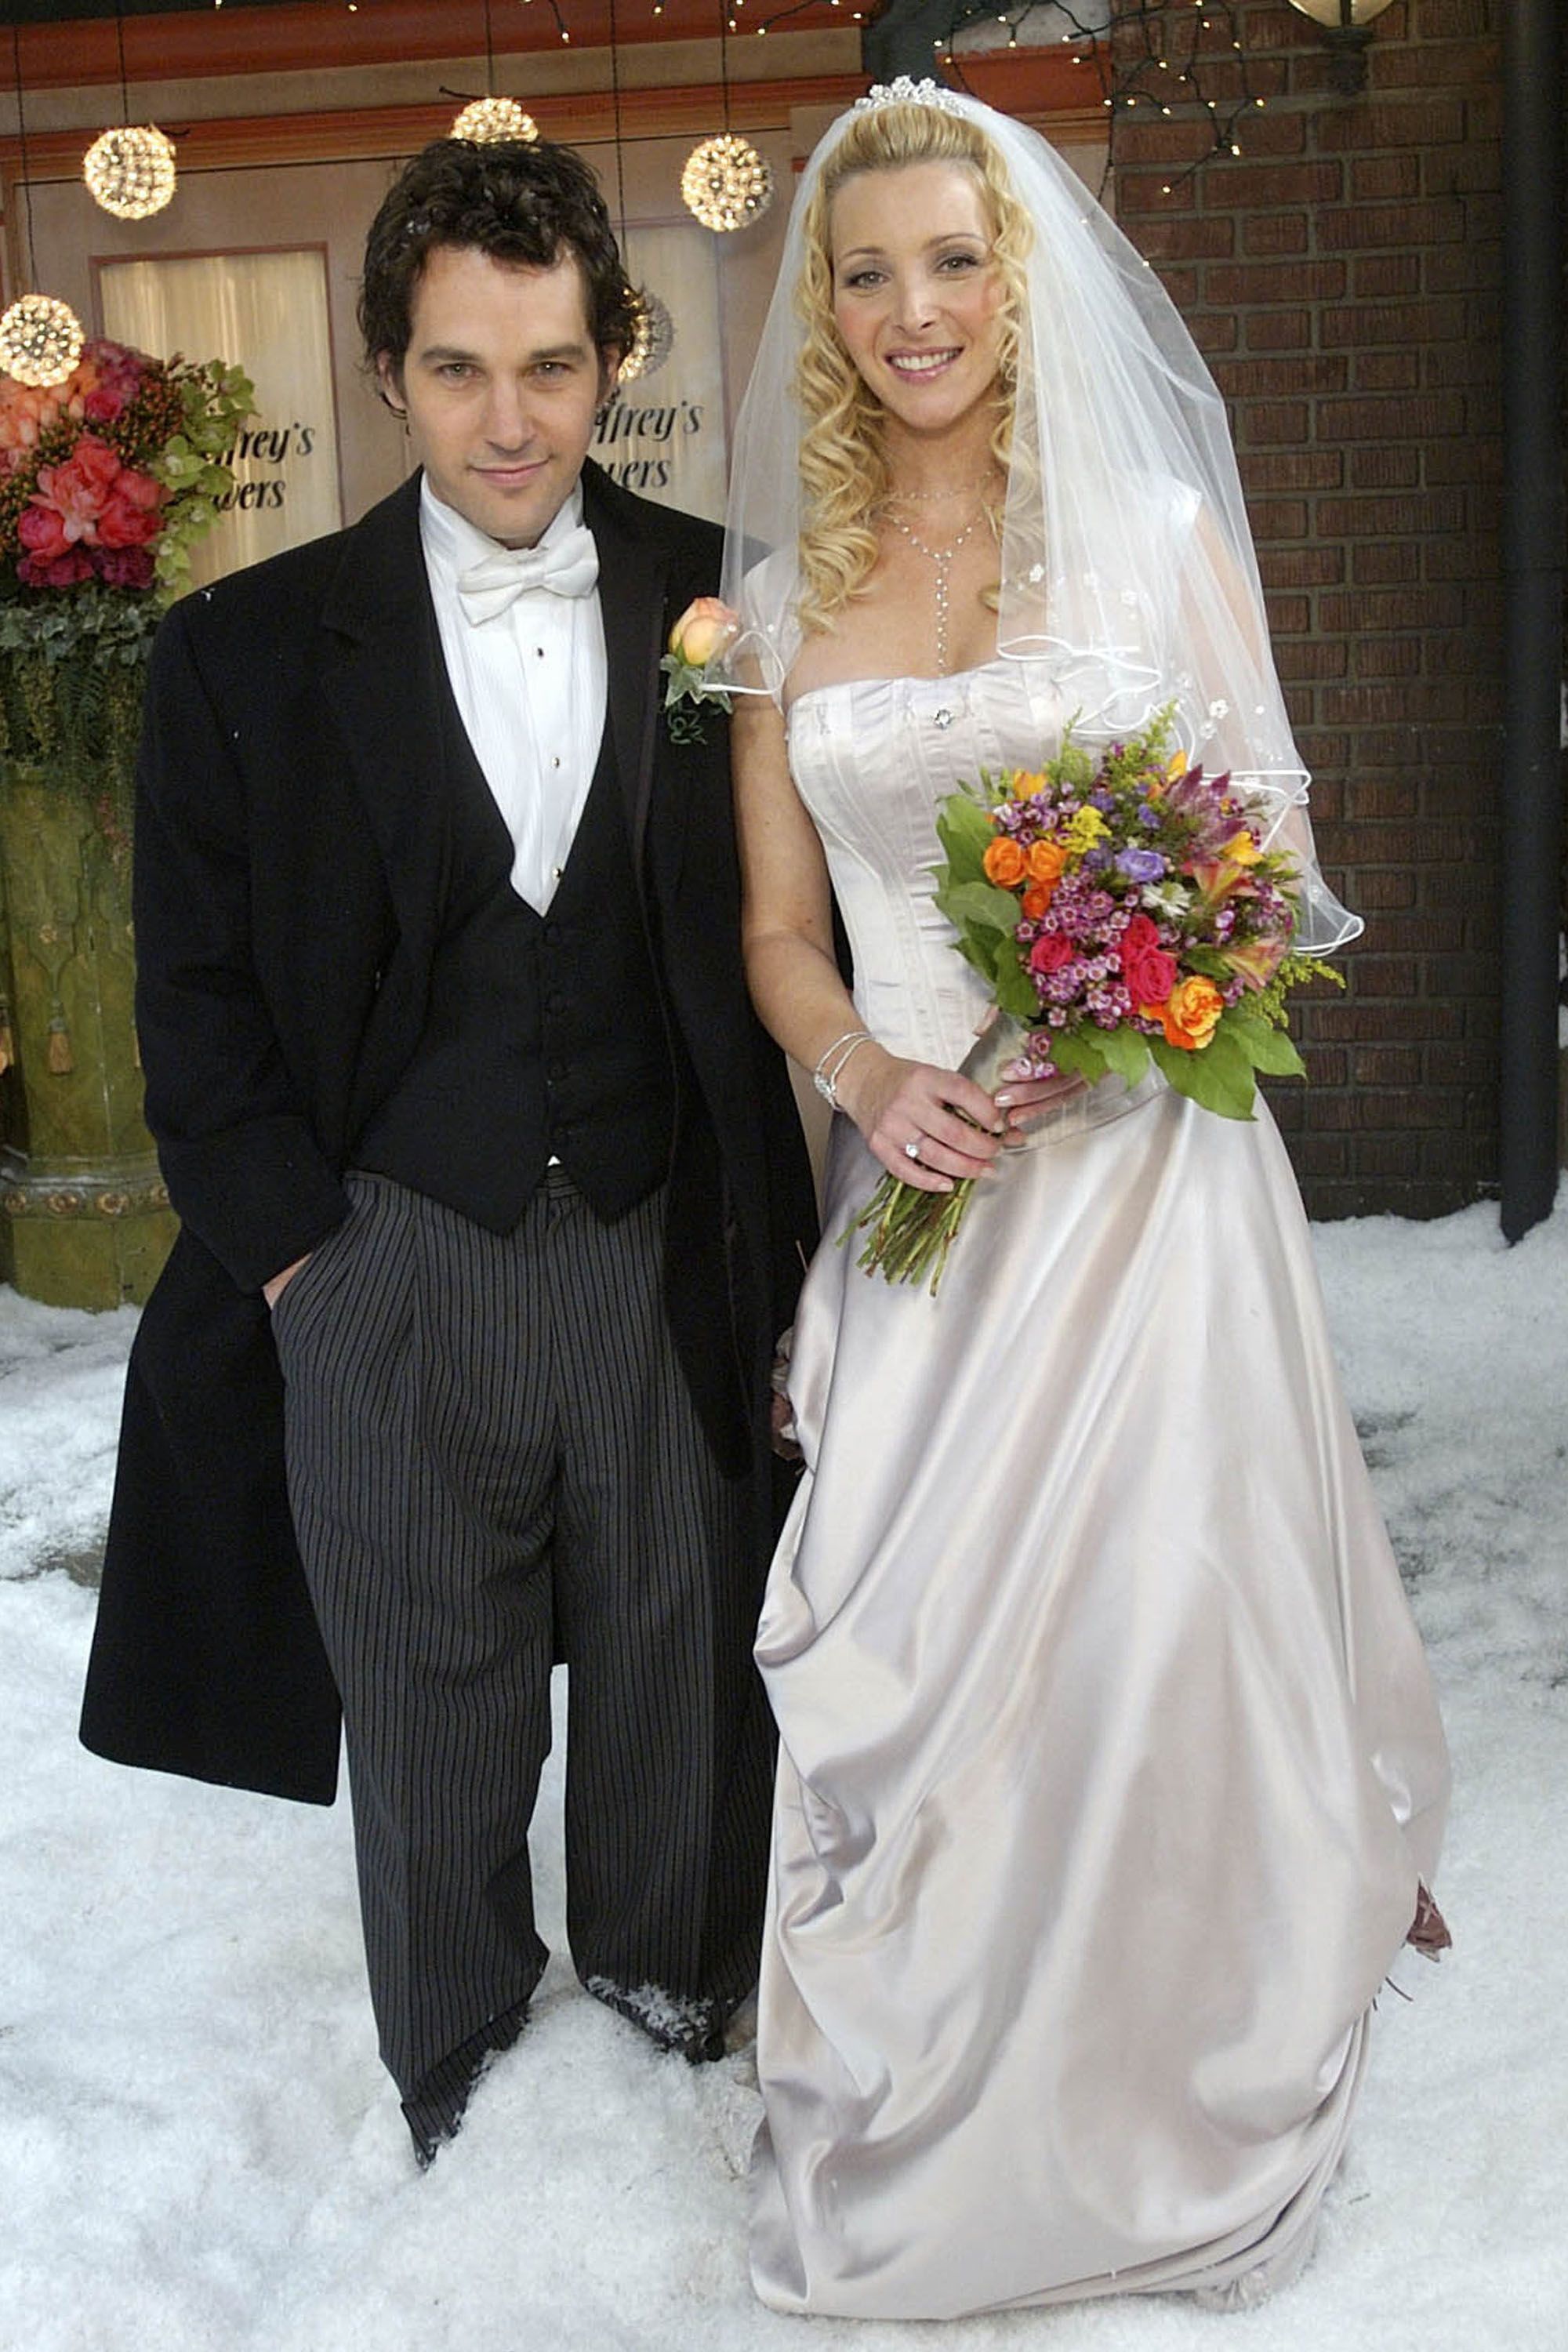 Iconic TV Wedding Dresses That Stole the Show